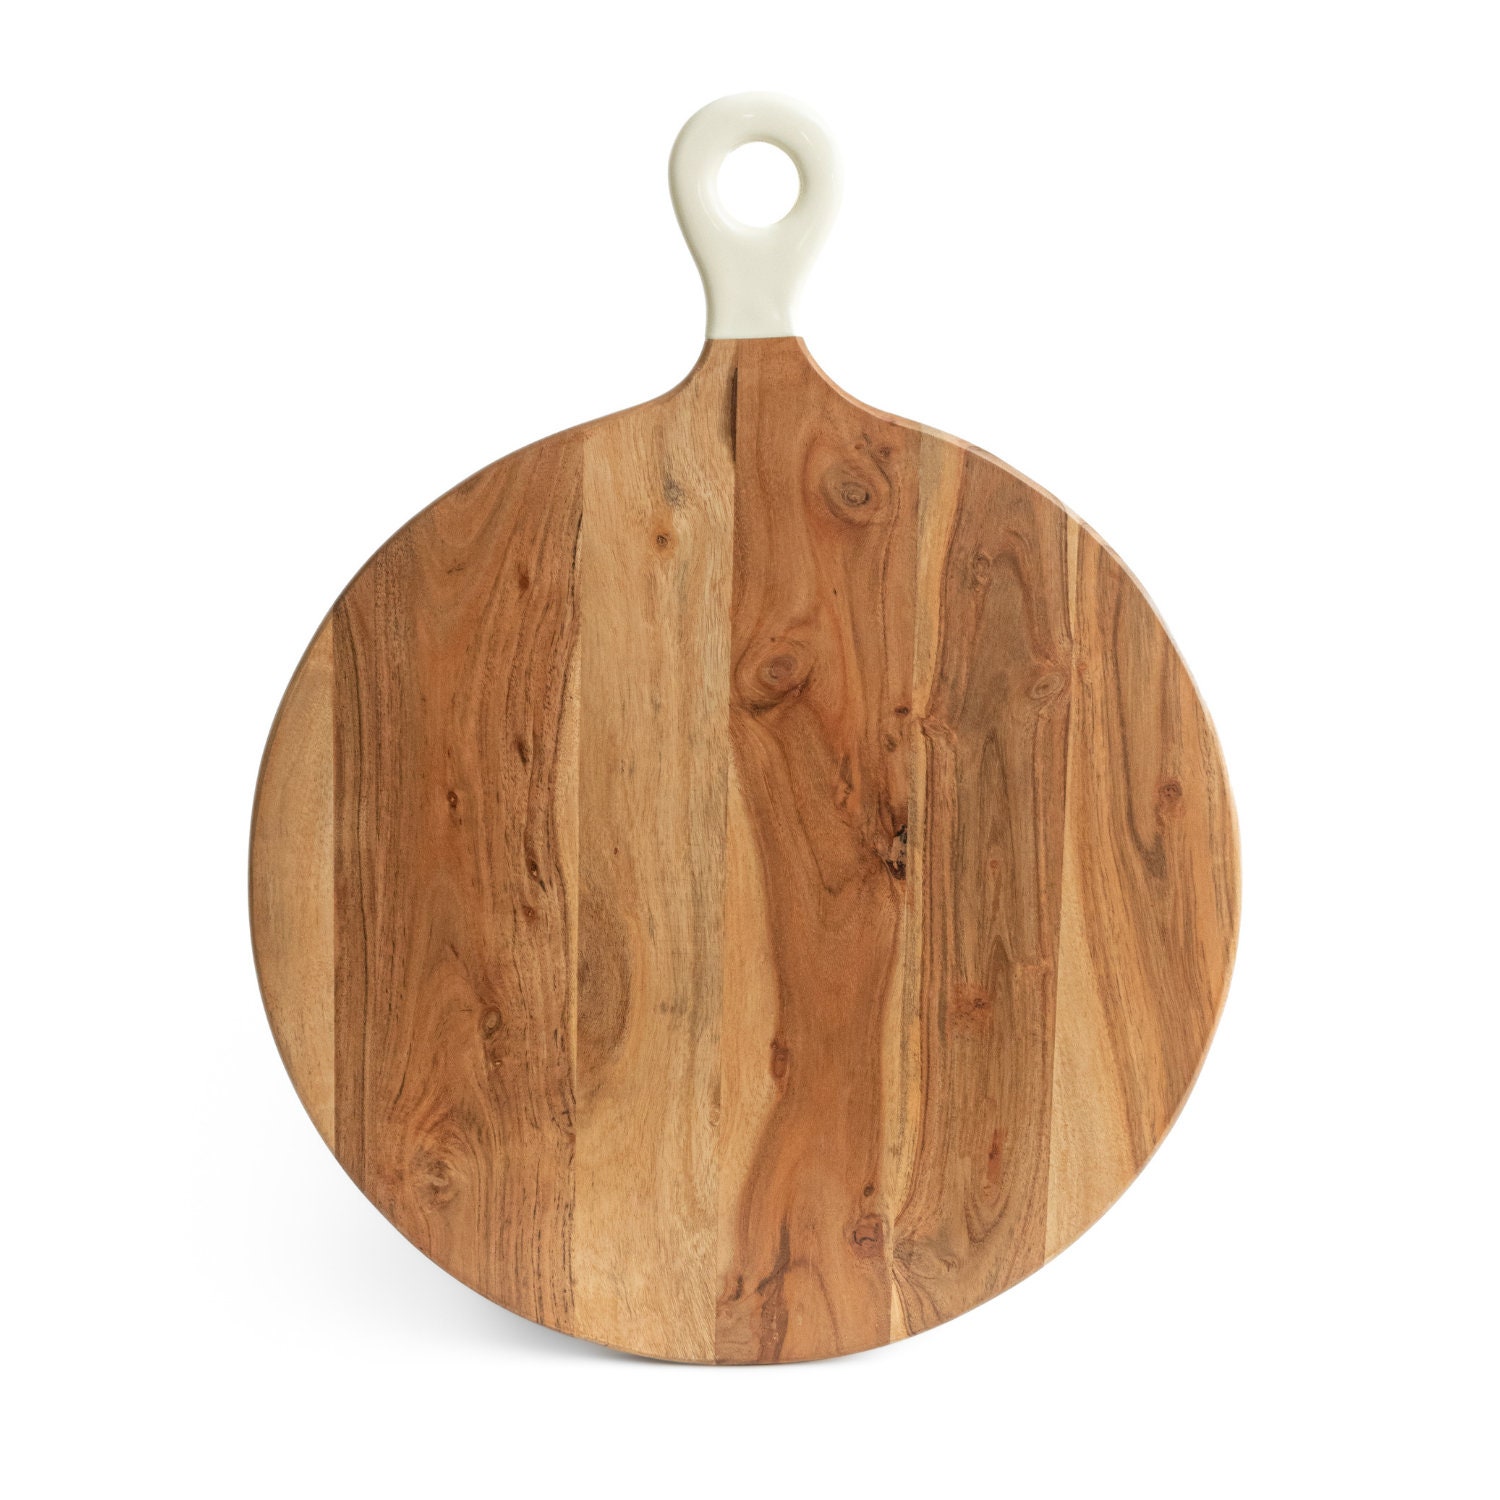 Round Server with Handleaka Pizza Board! - Cutting Boards and More